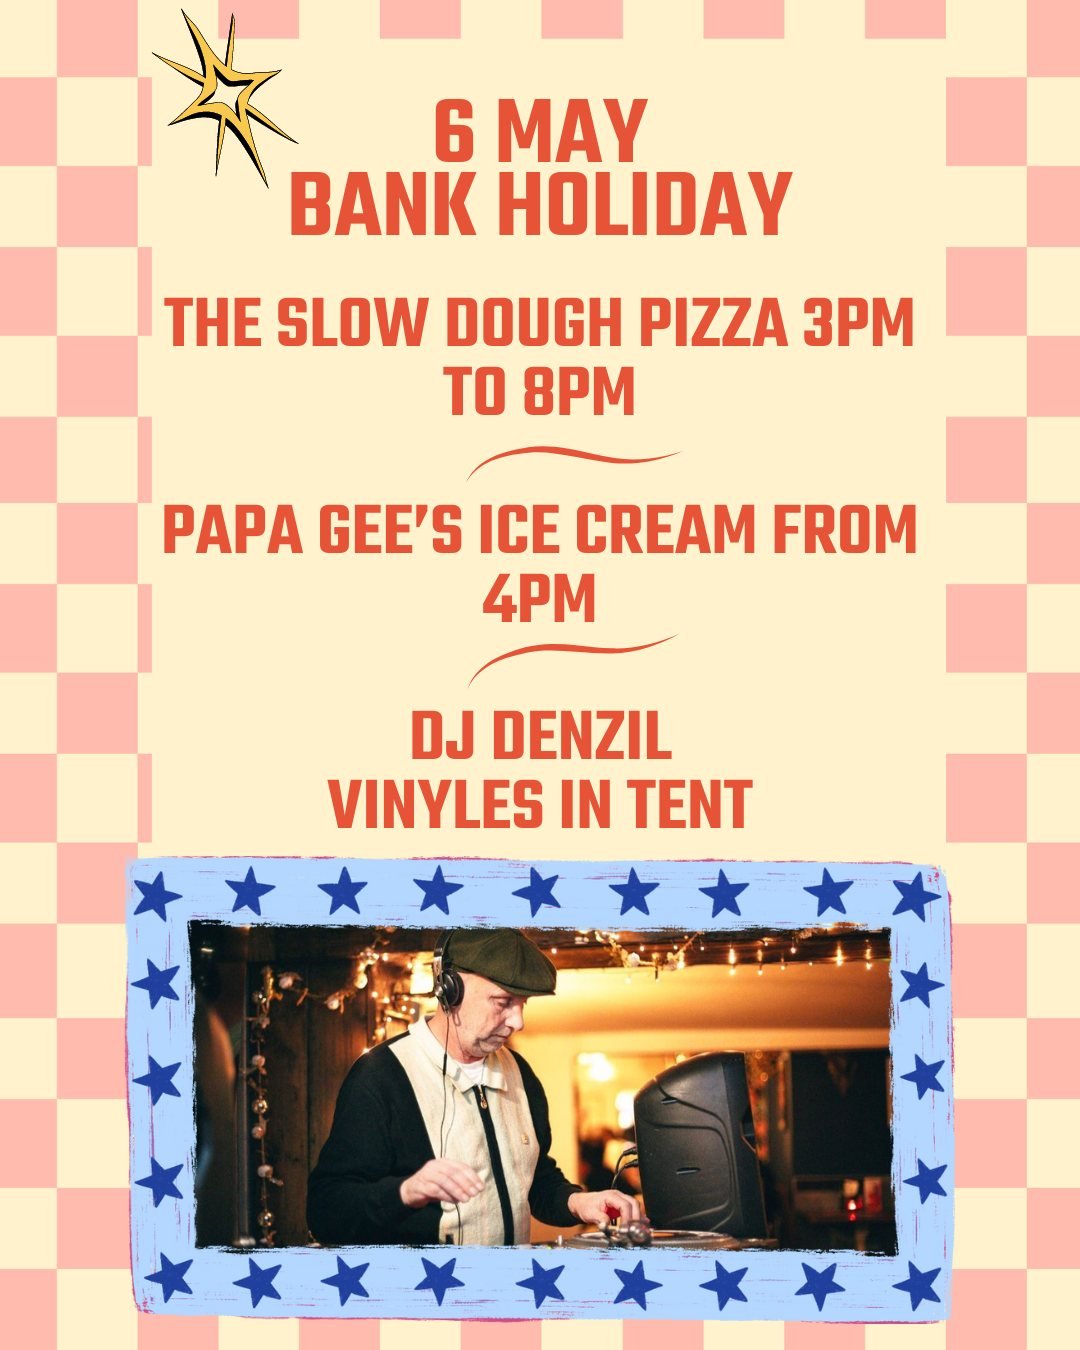 🎉 Join us for an epic Bank Holiday celebration at The Royal Oak on May 6th! 🎉

Save the date and come along from 12pm onwards! @theslowdoughpizzaco will be serving up delicious pizzas from 3pm until they run out, and @papageesicecream will be on ha